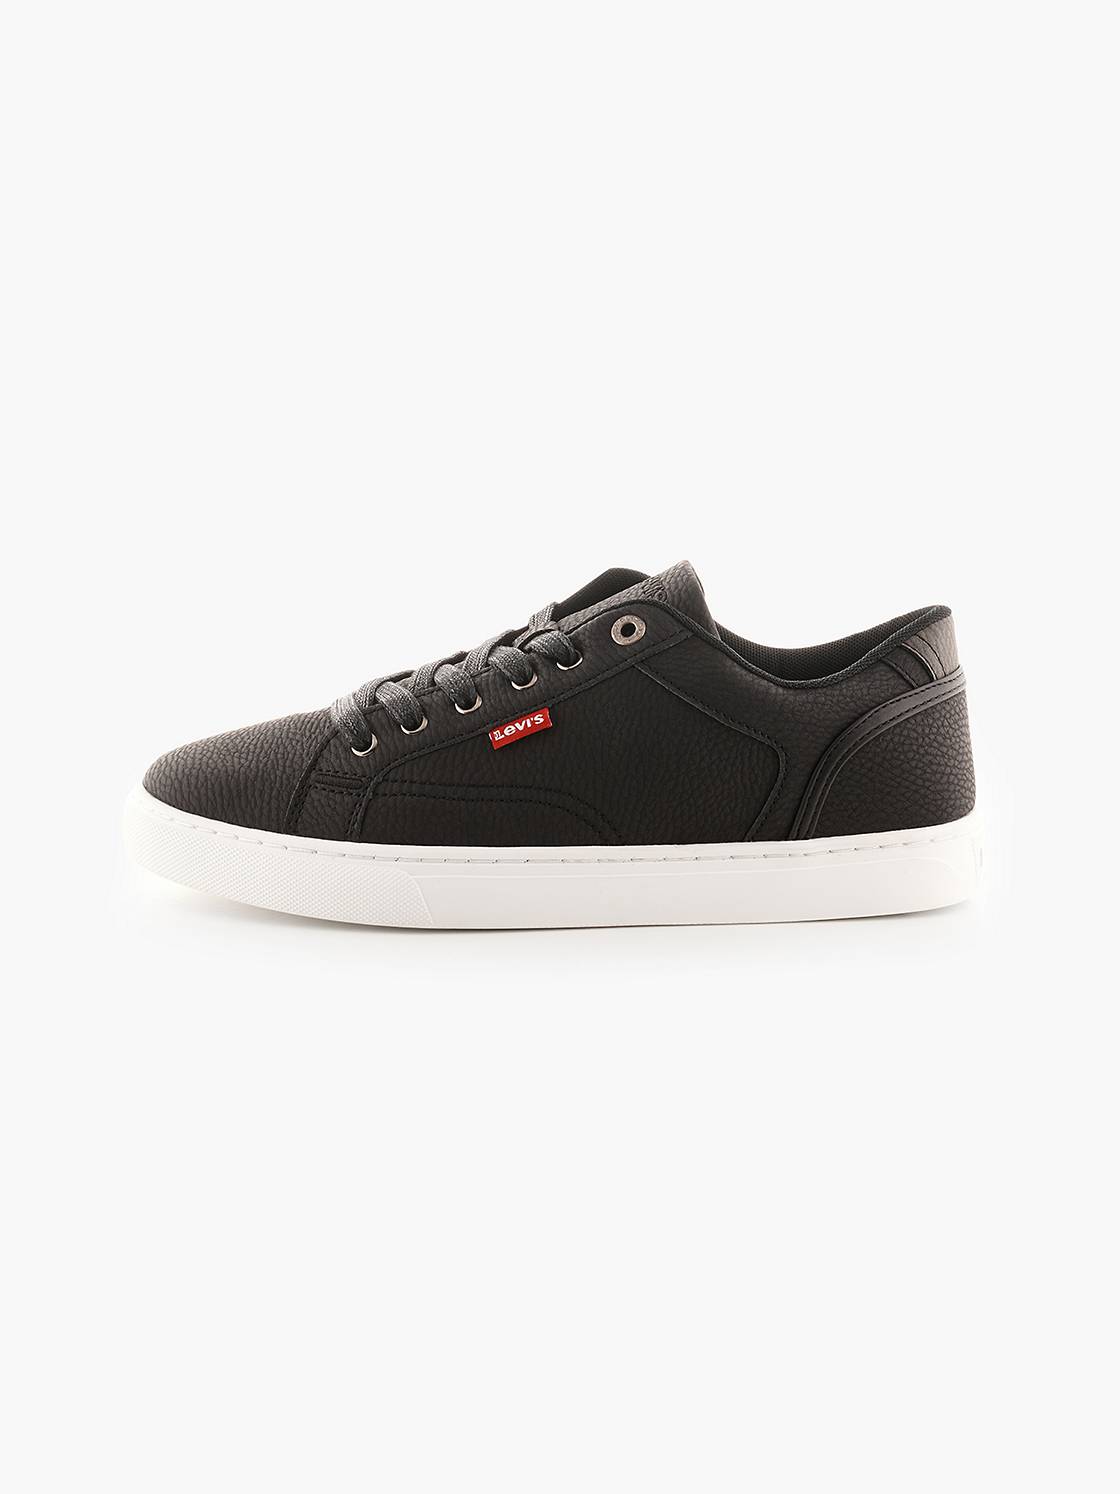 Levi's® Men's Courtright Sneakers 1